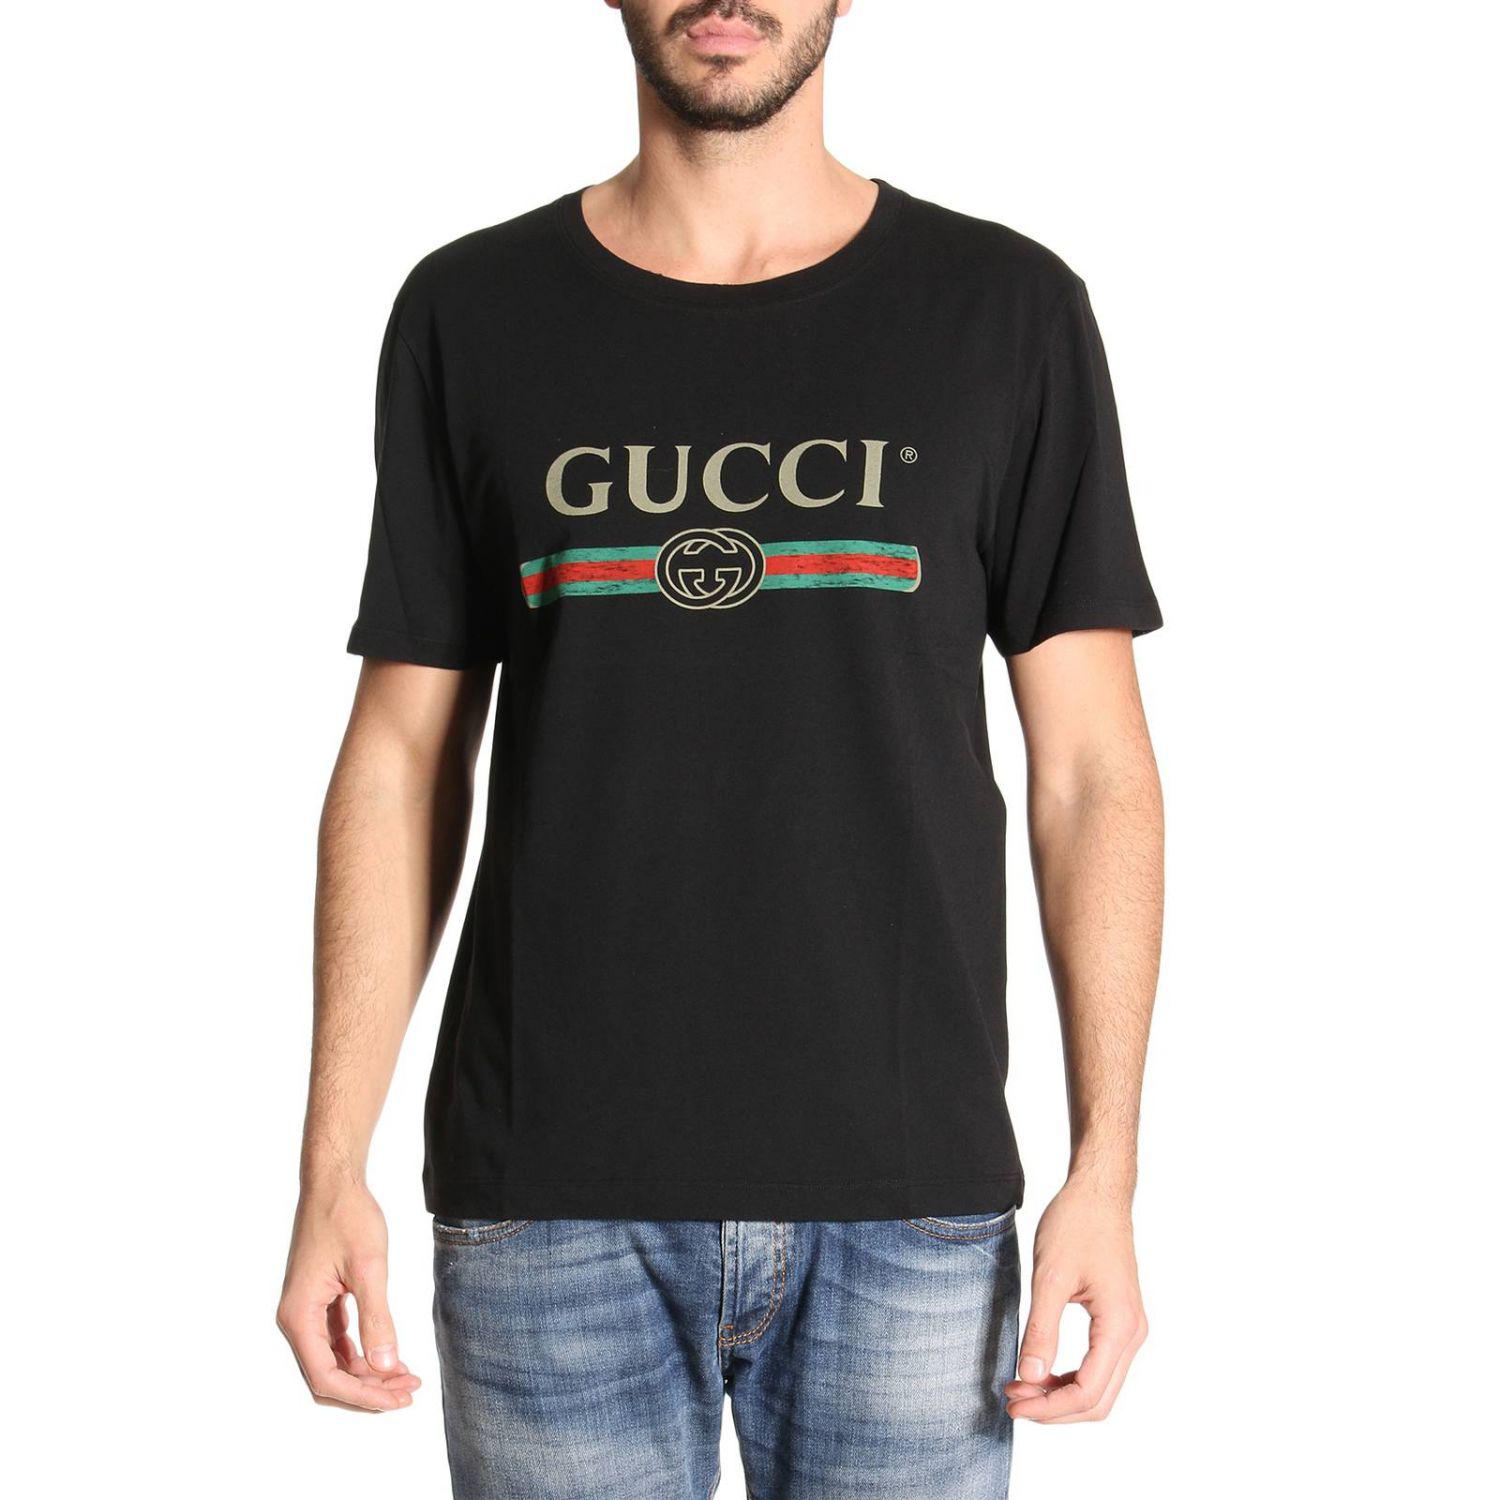 Gucci T Shirt : Gucci GG Logo Print T-shirt in Red for Men - Lyst / The